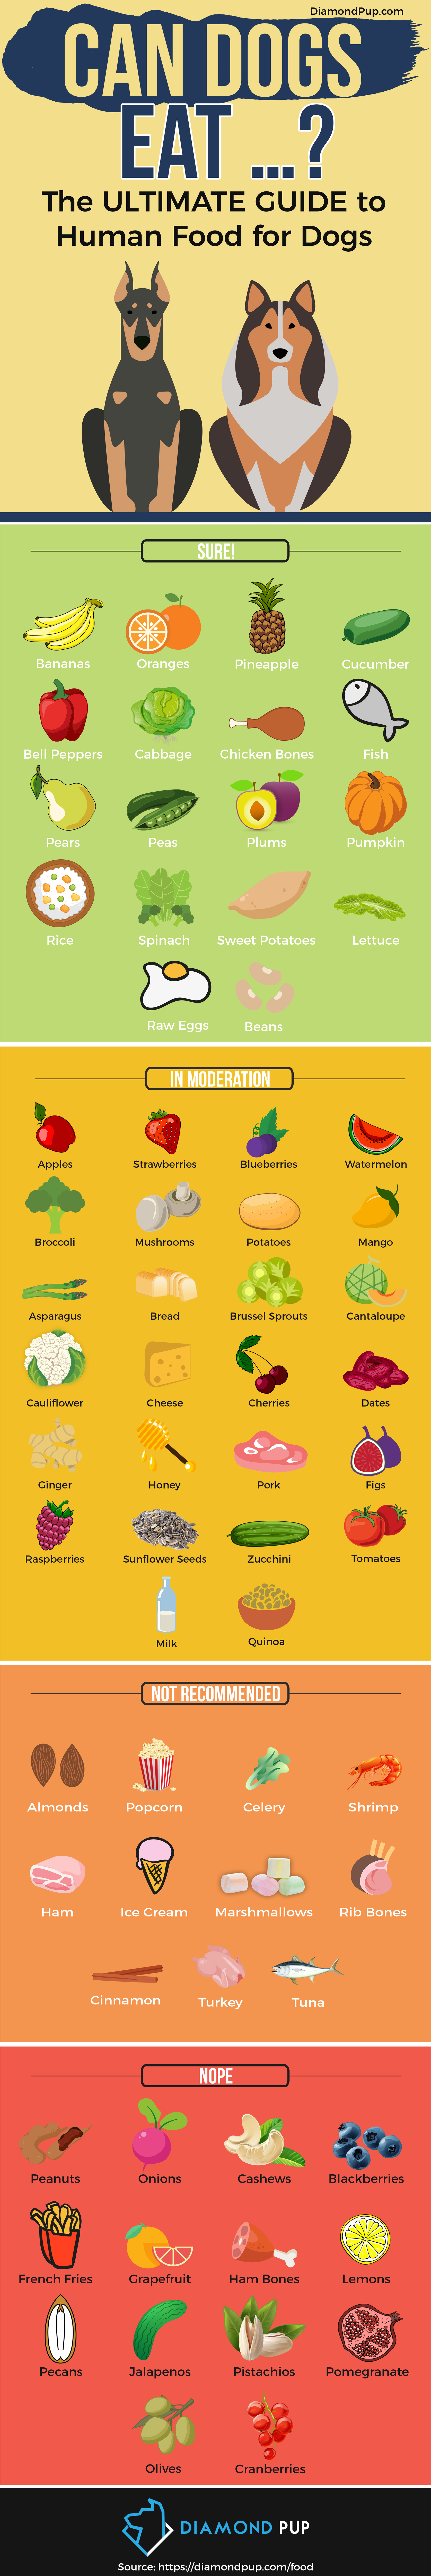 Human Food for Dogs - Can/can't eat list (infographic)